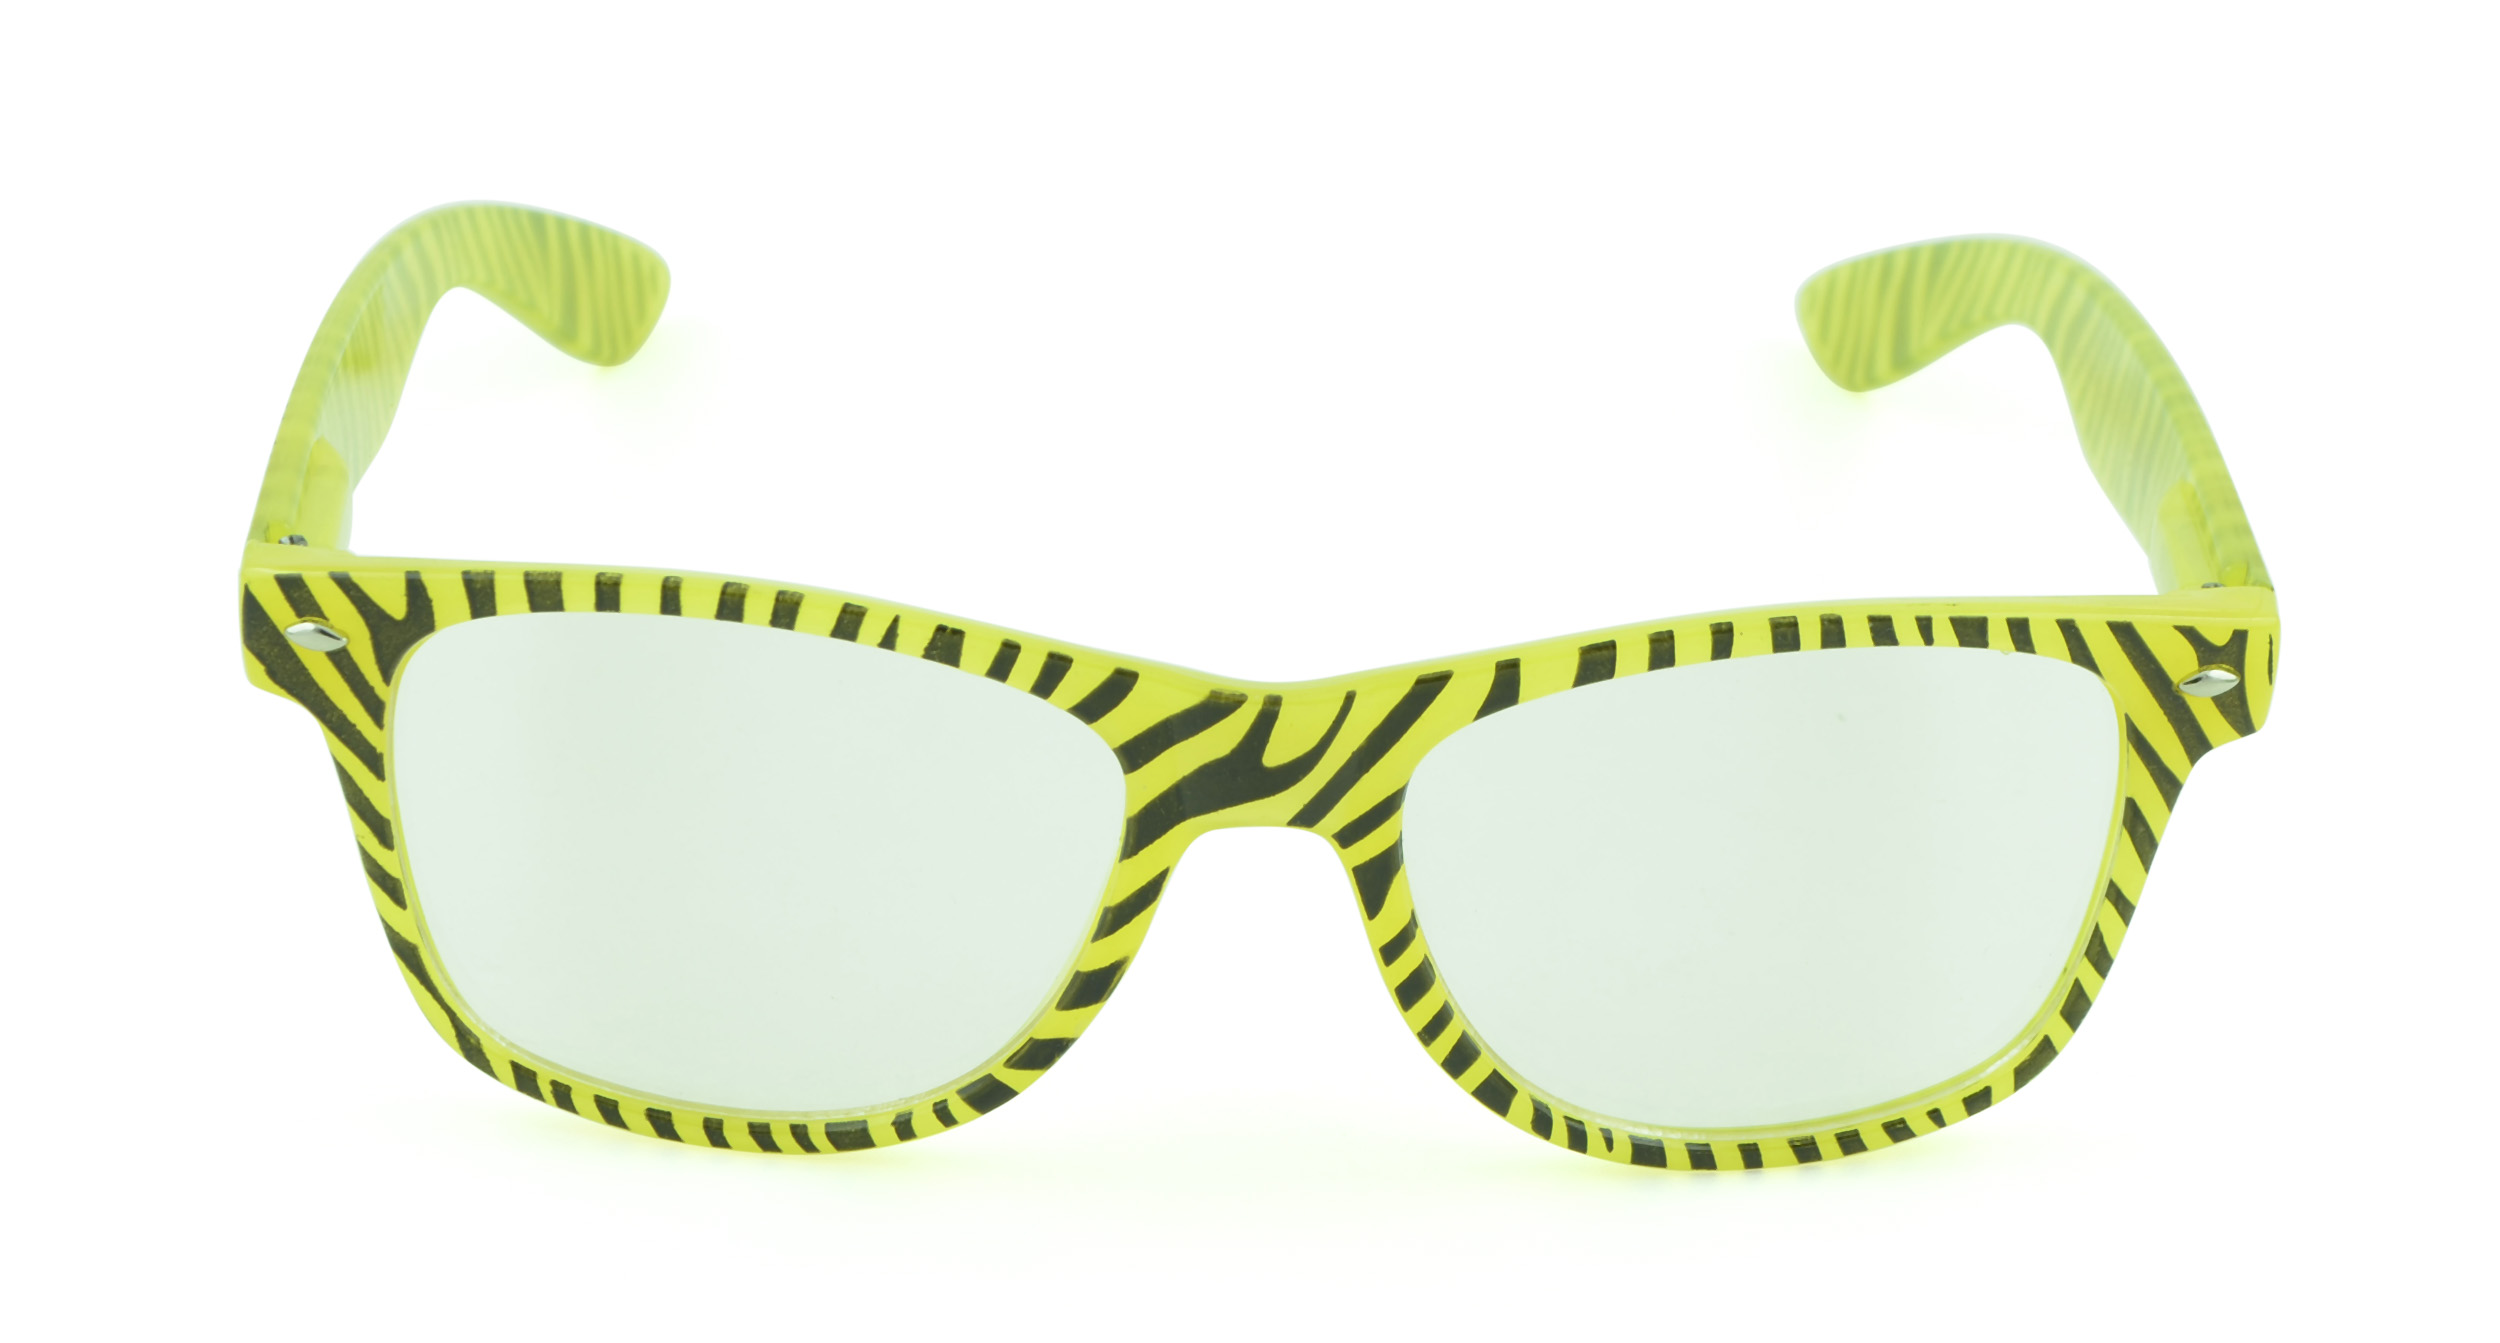 Belle Donne - Unisex Cool Rave Style Glow in the Dark Sunglasses - Yellow Zebra